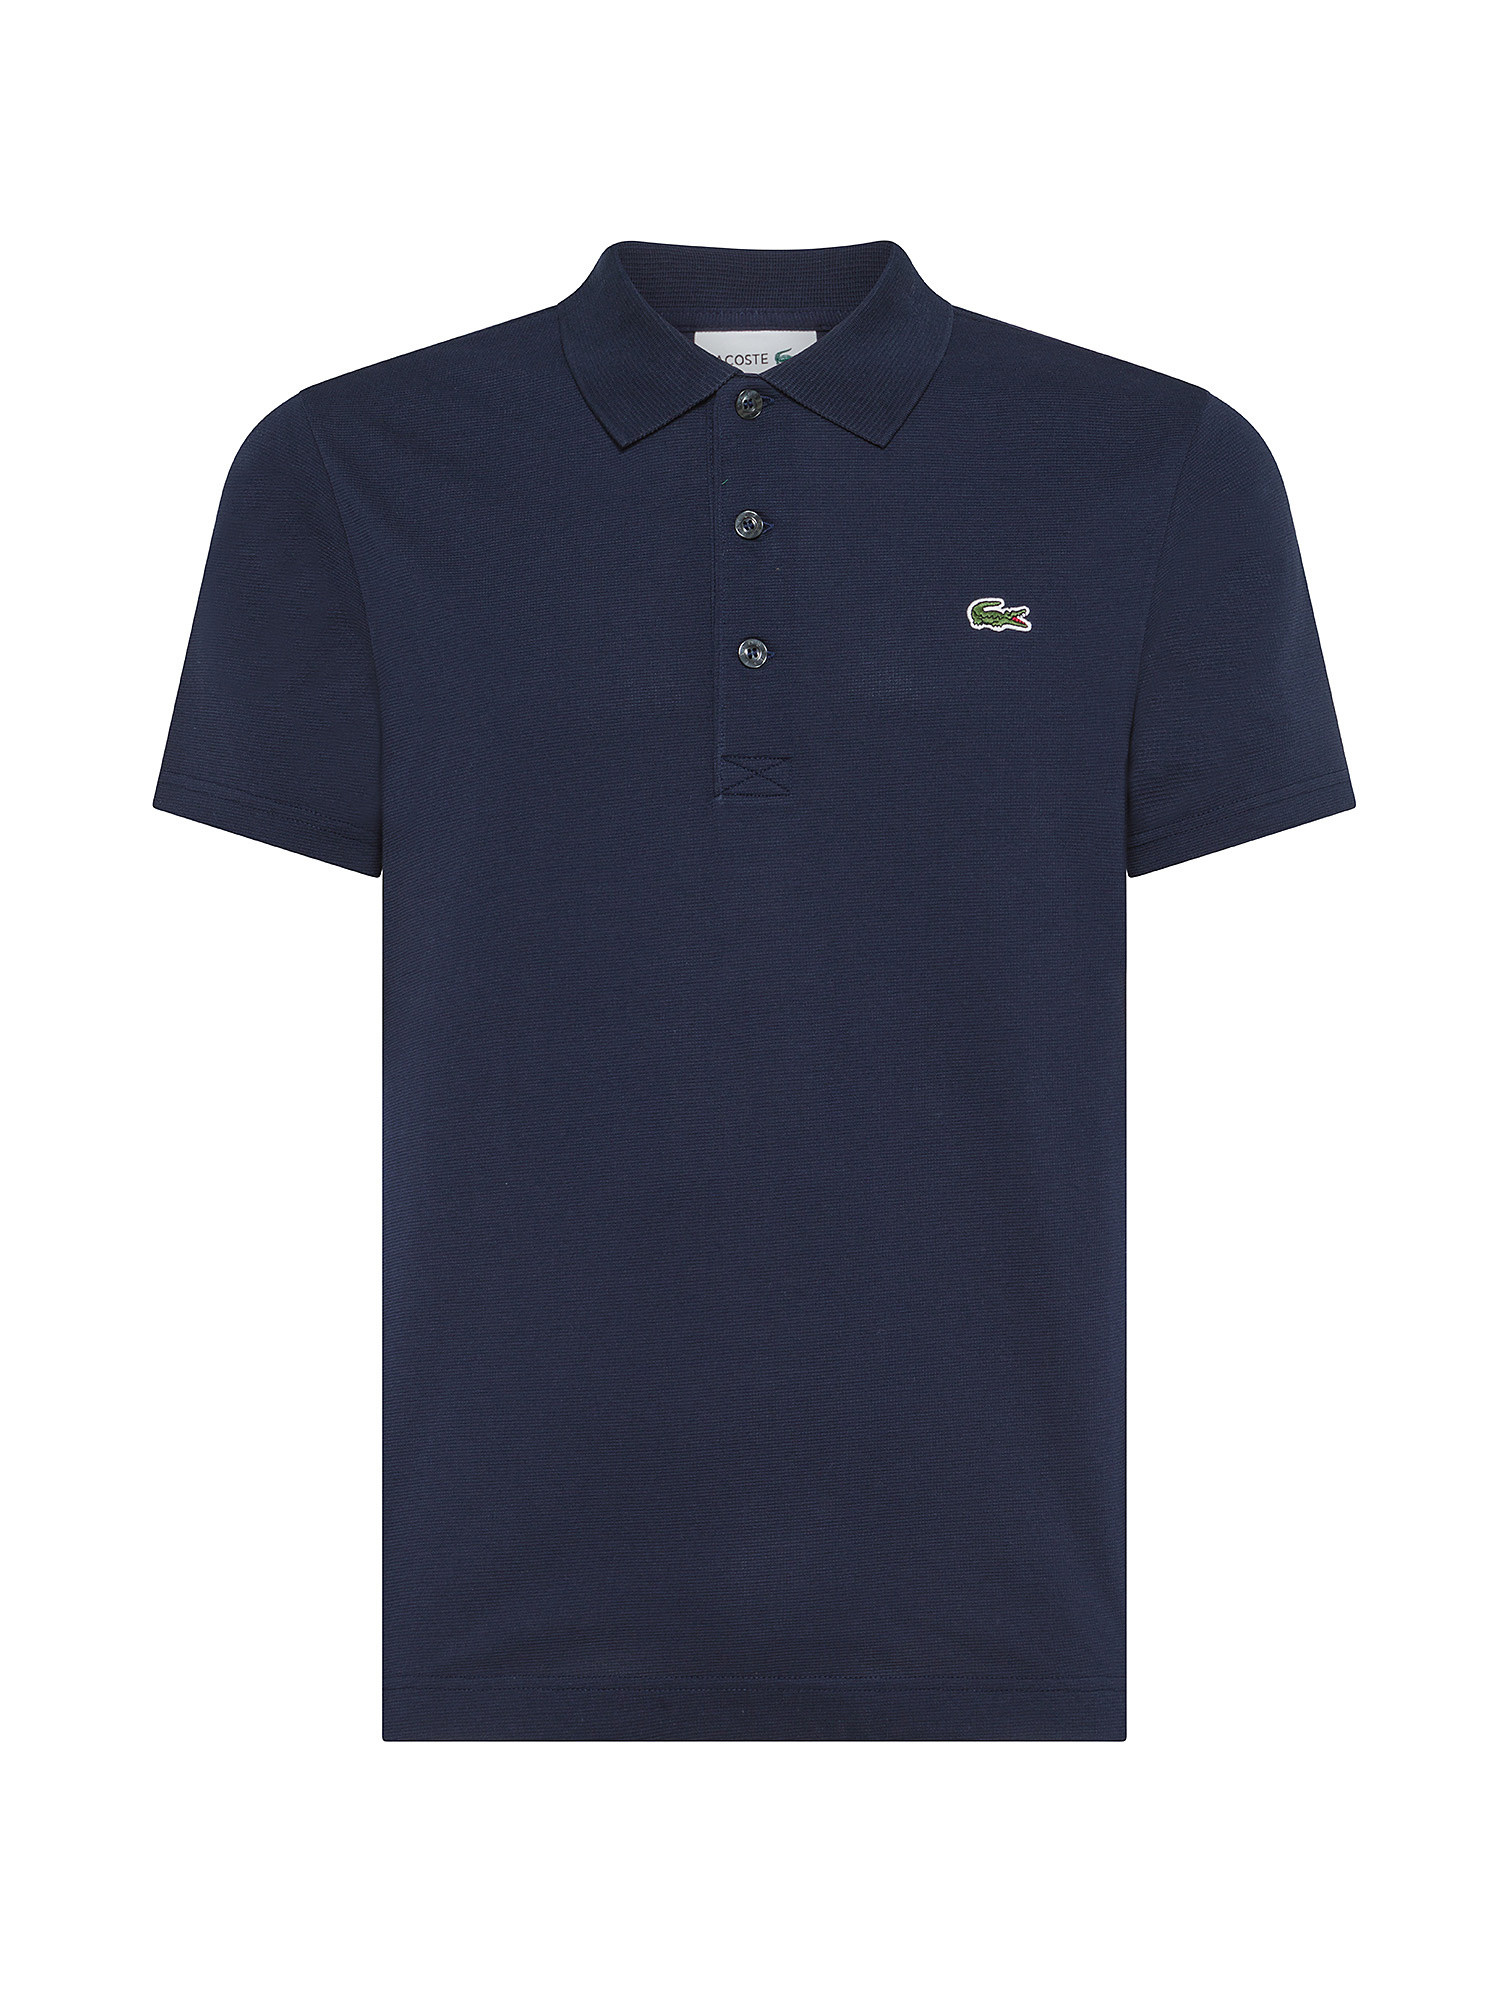 Lacoste - Polo stretch regular fit, Blu scuro, large image number 0